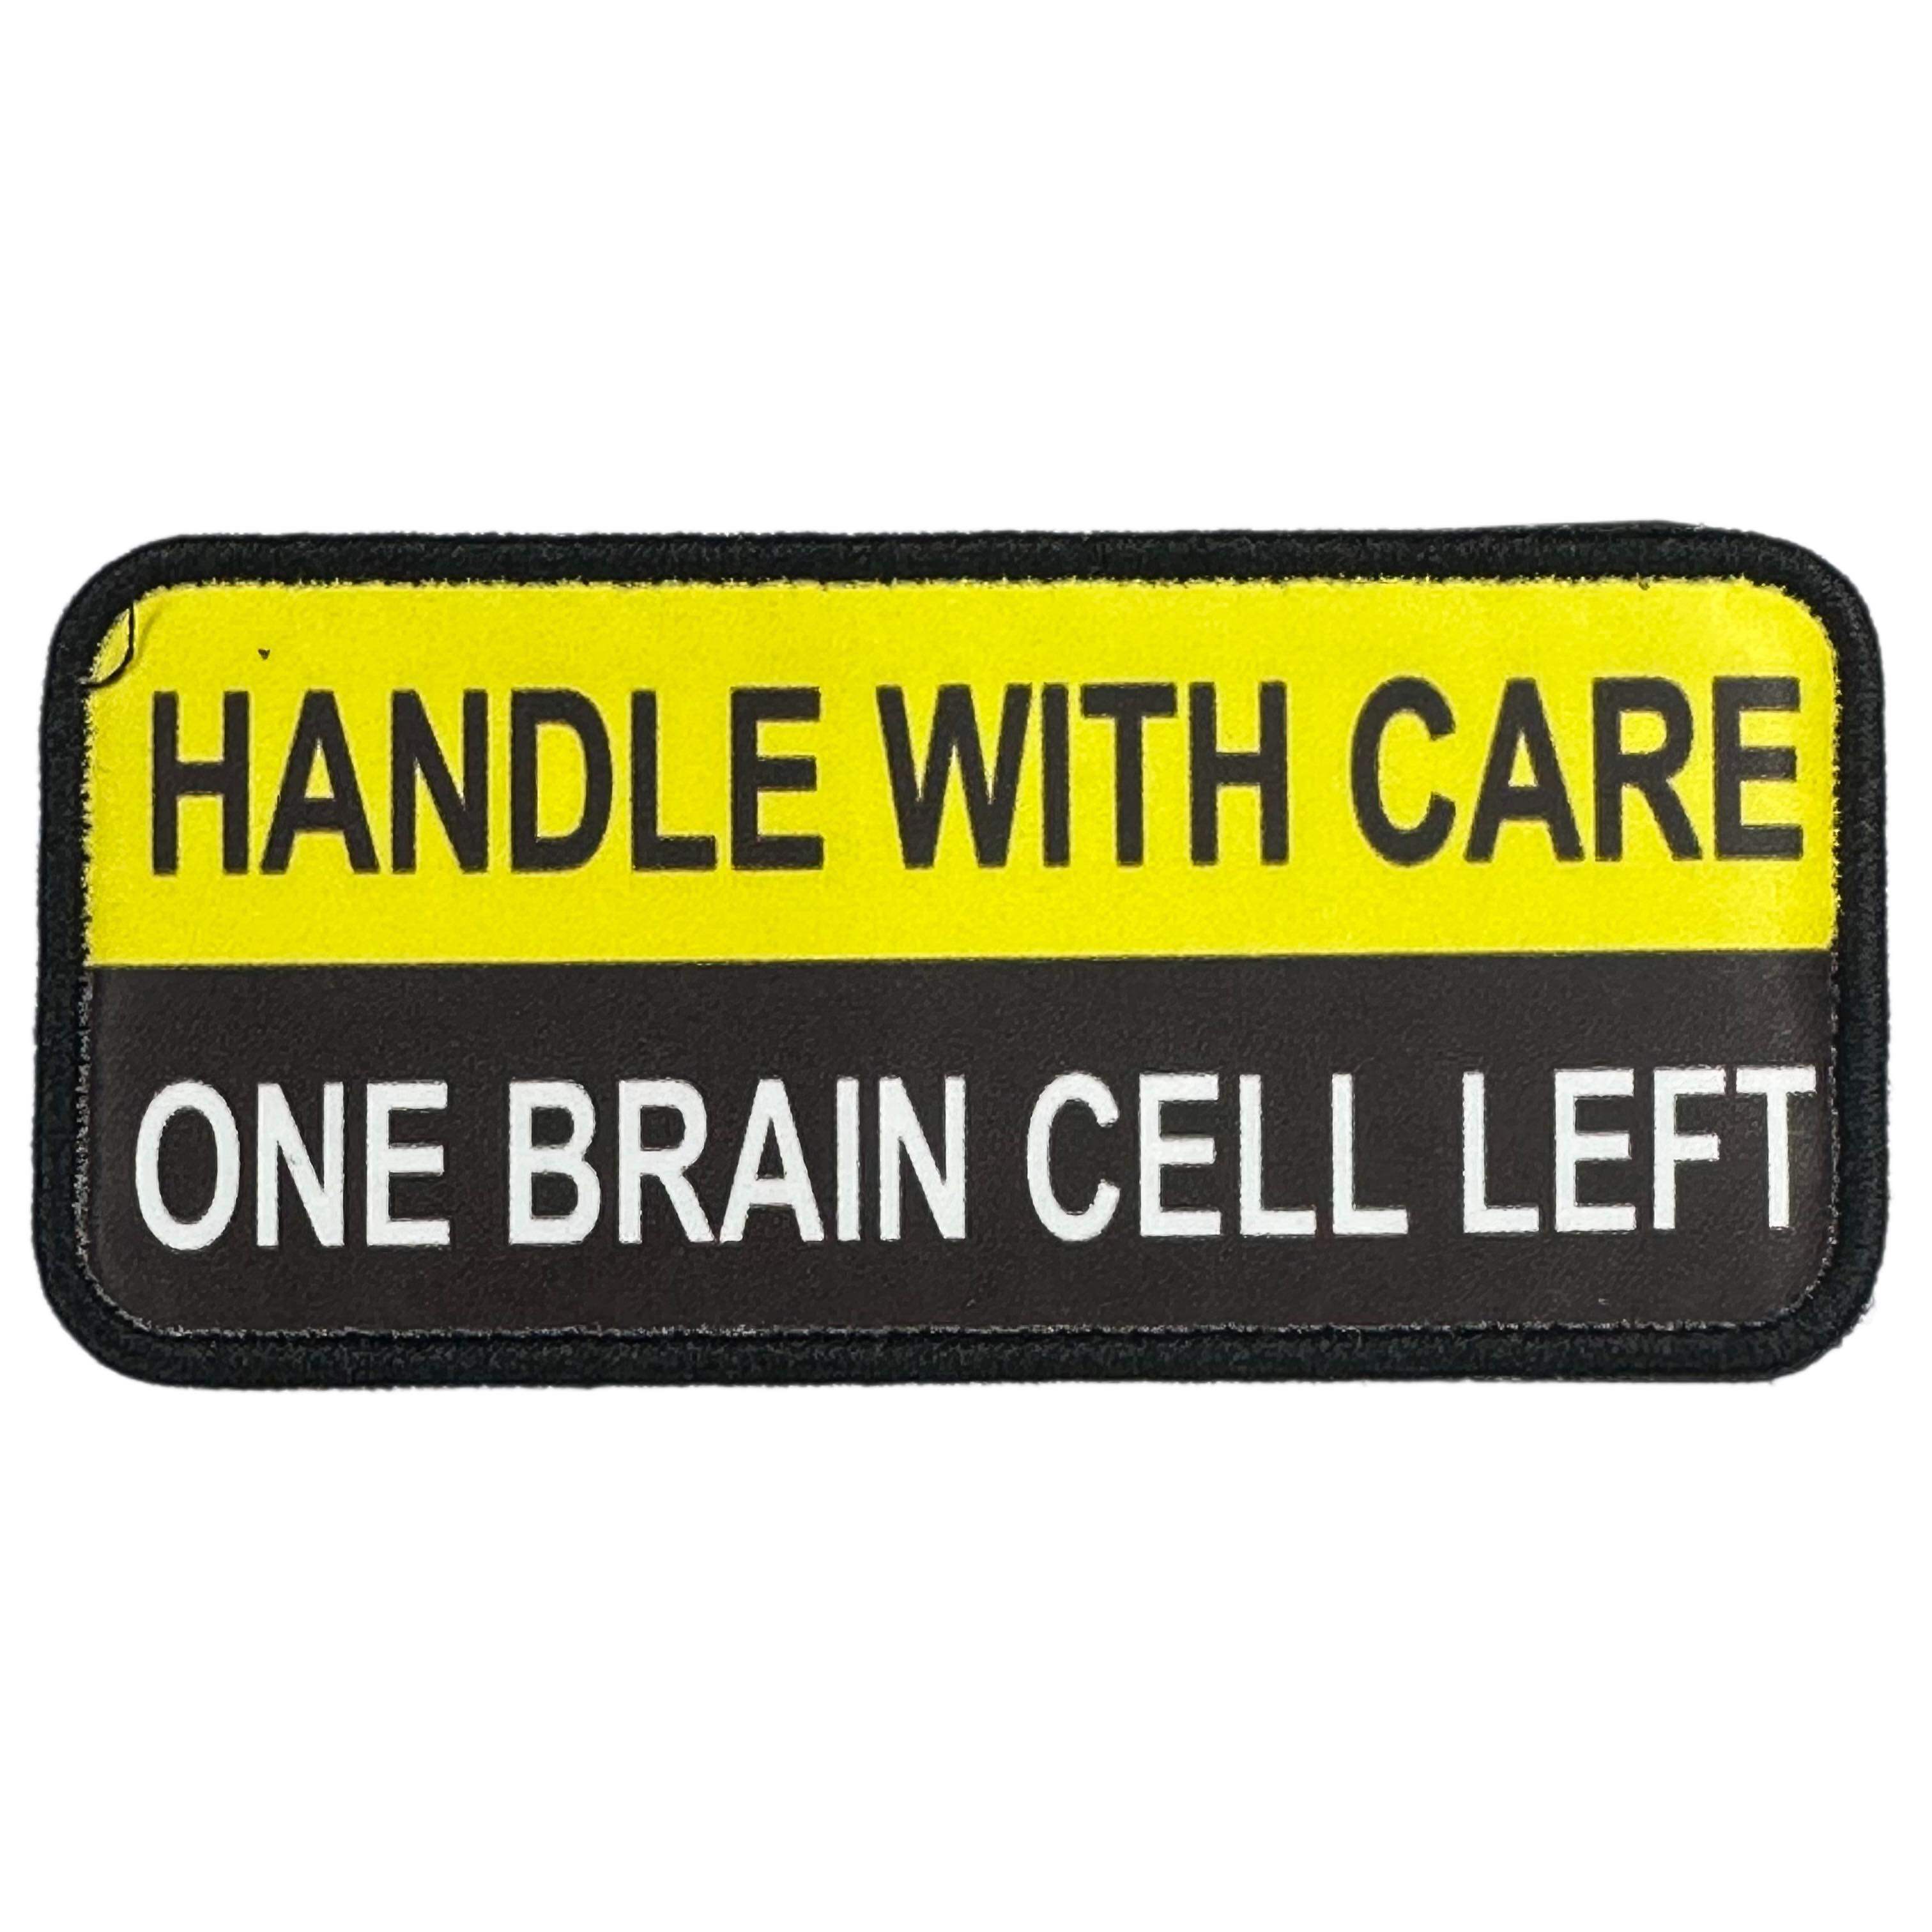 Printed Morale Patches - Handle With Care One Brain Cell Left Velcro Morale Patch